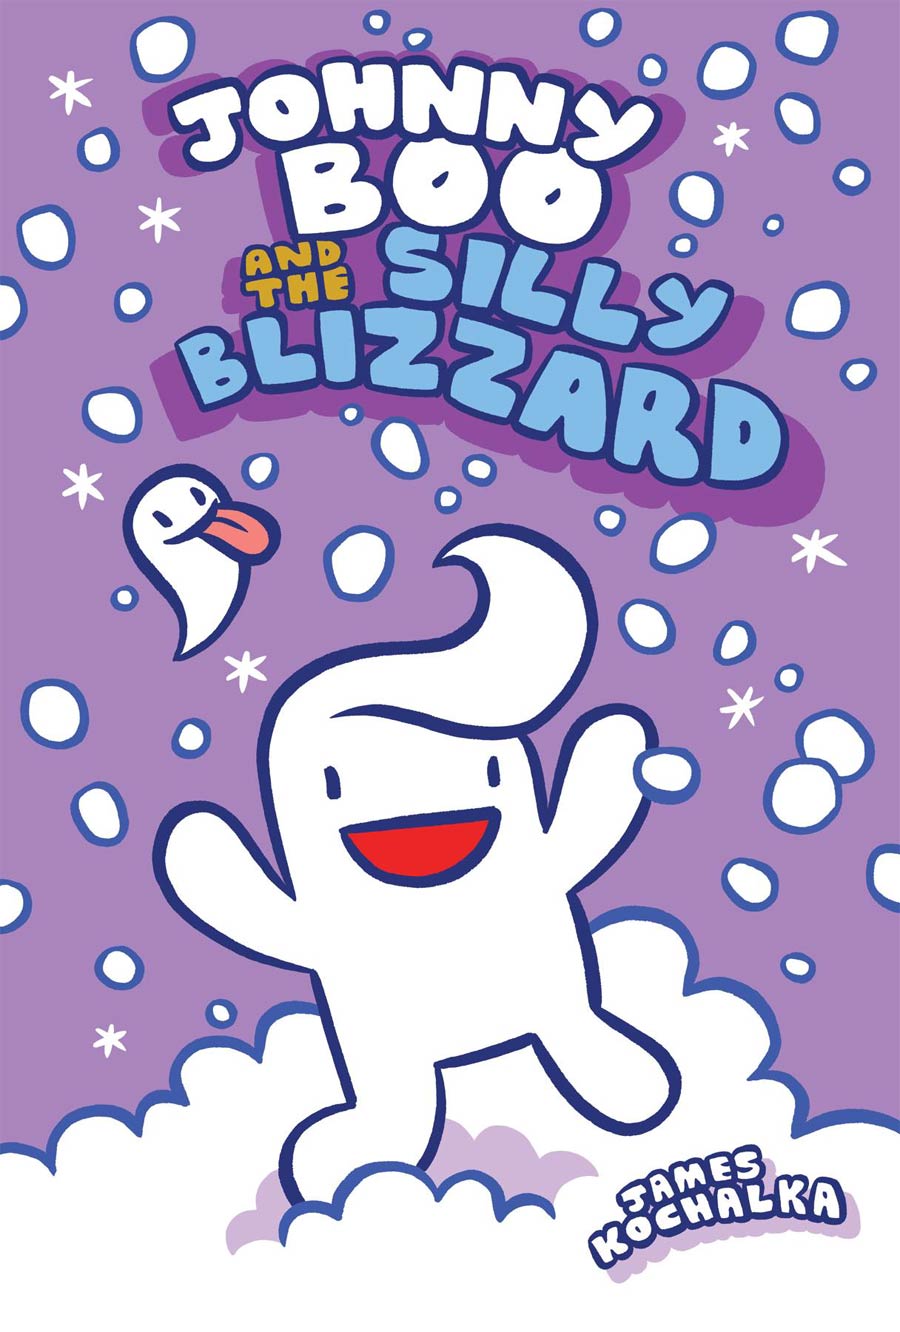 Johnny Boo Vol 12 Johnny Boo And The Silly Blizzard HC